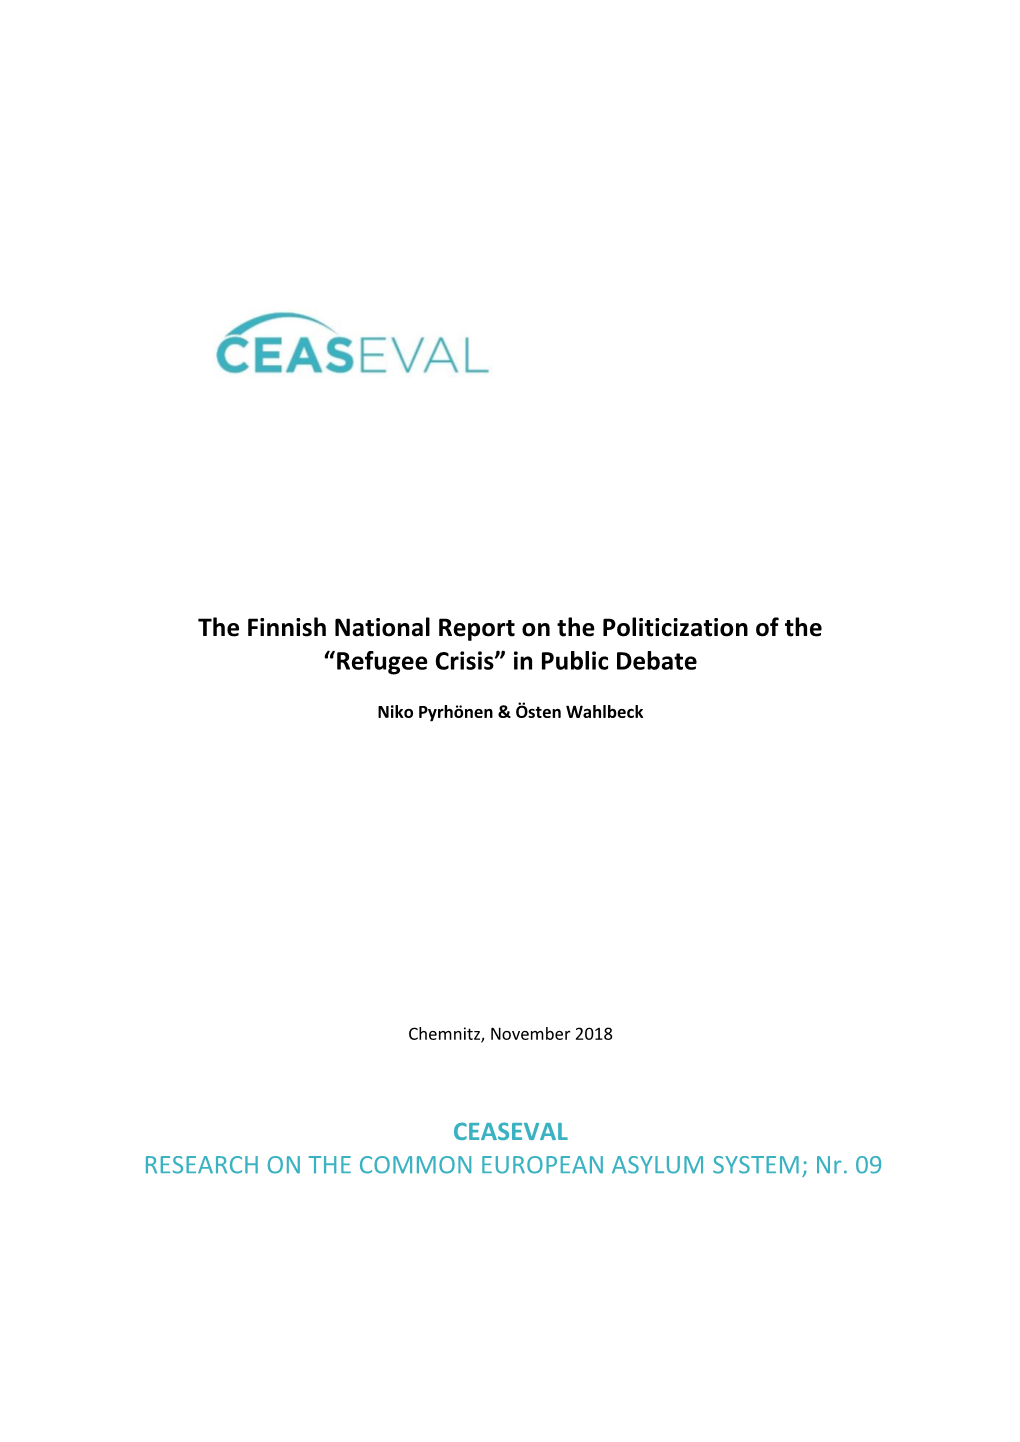 The Finnish National Report on the Politicization of the “Refugee Crisis” in Public Debate